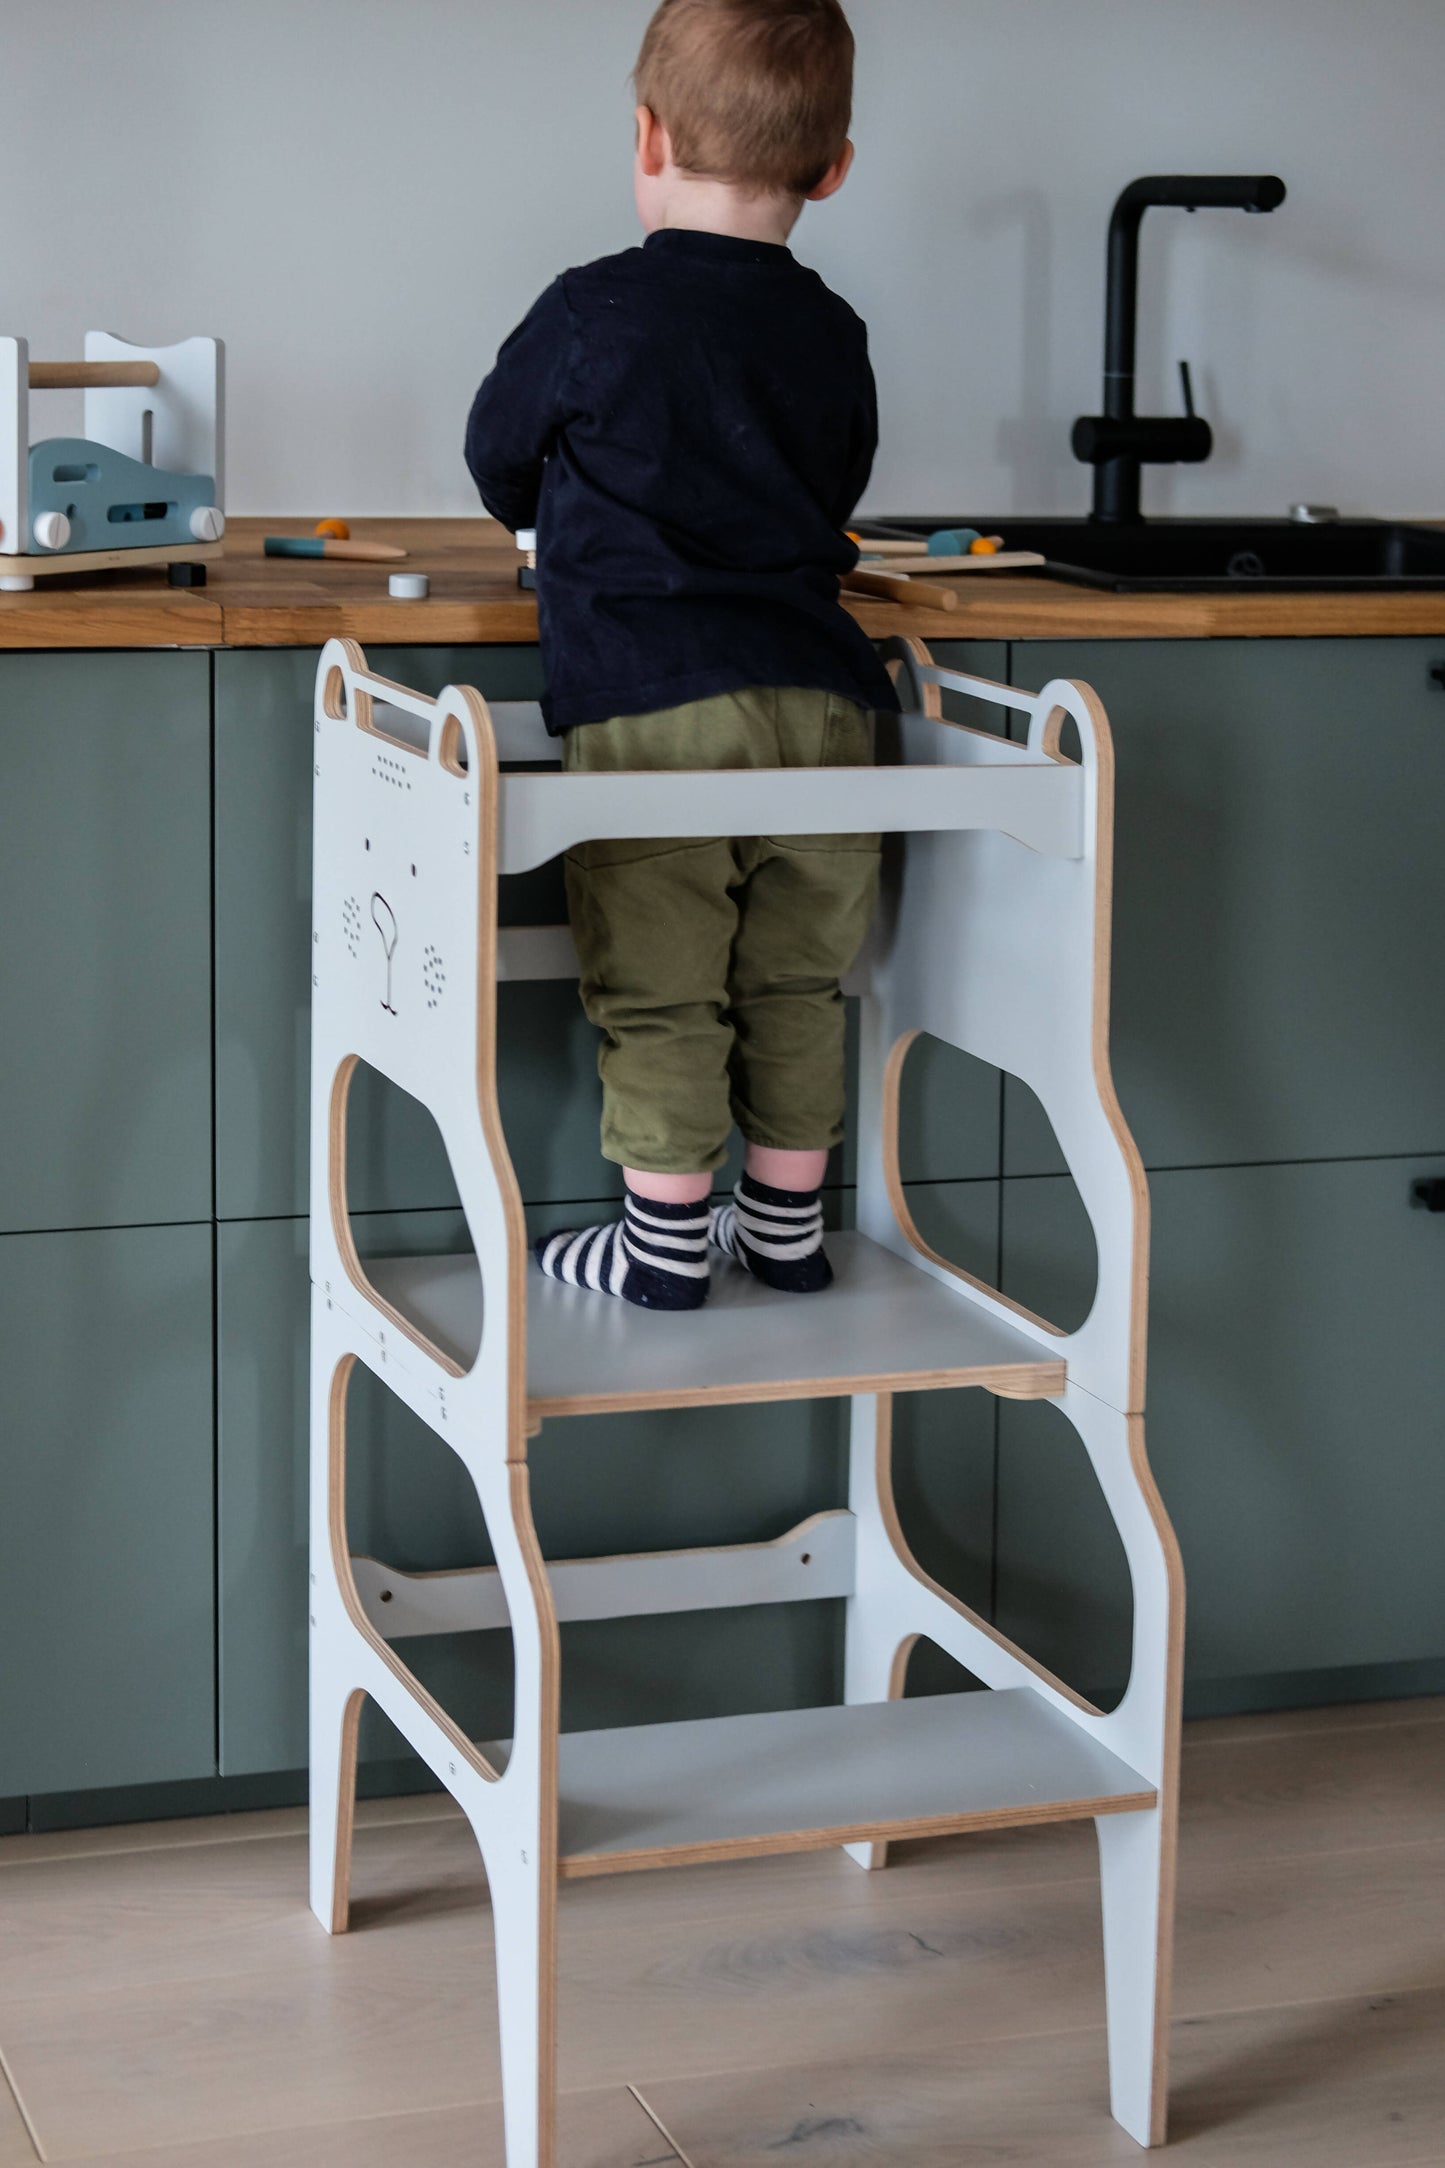 TEDDY LEARNING TOWER – TABLE AND CHAIR